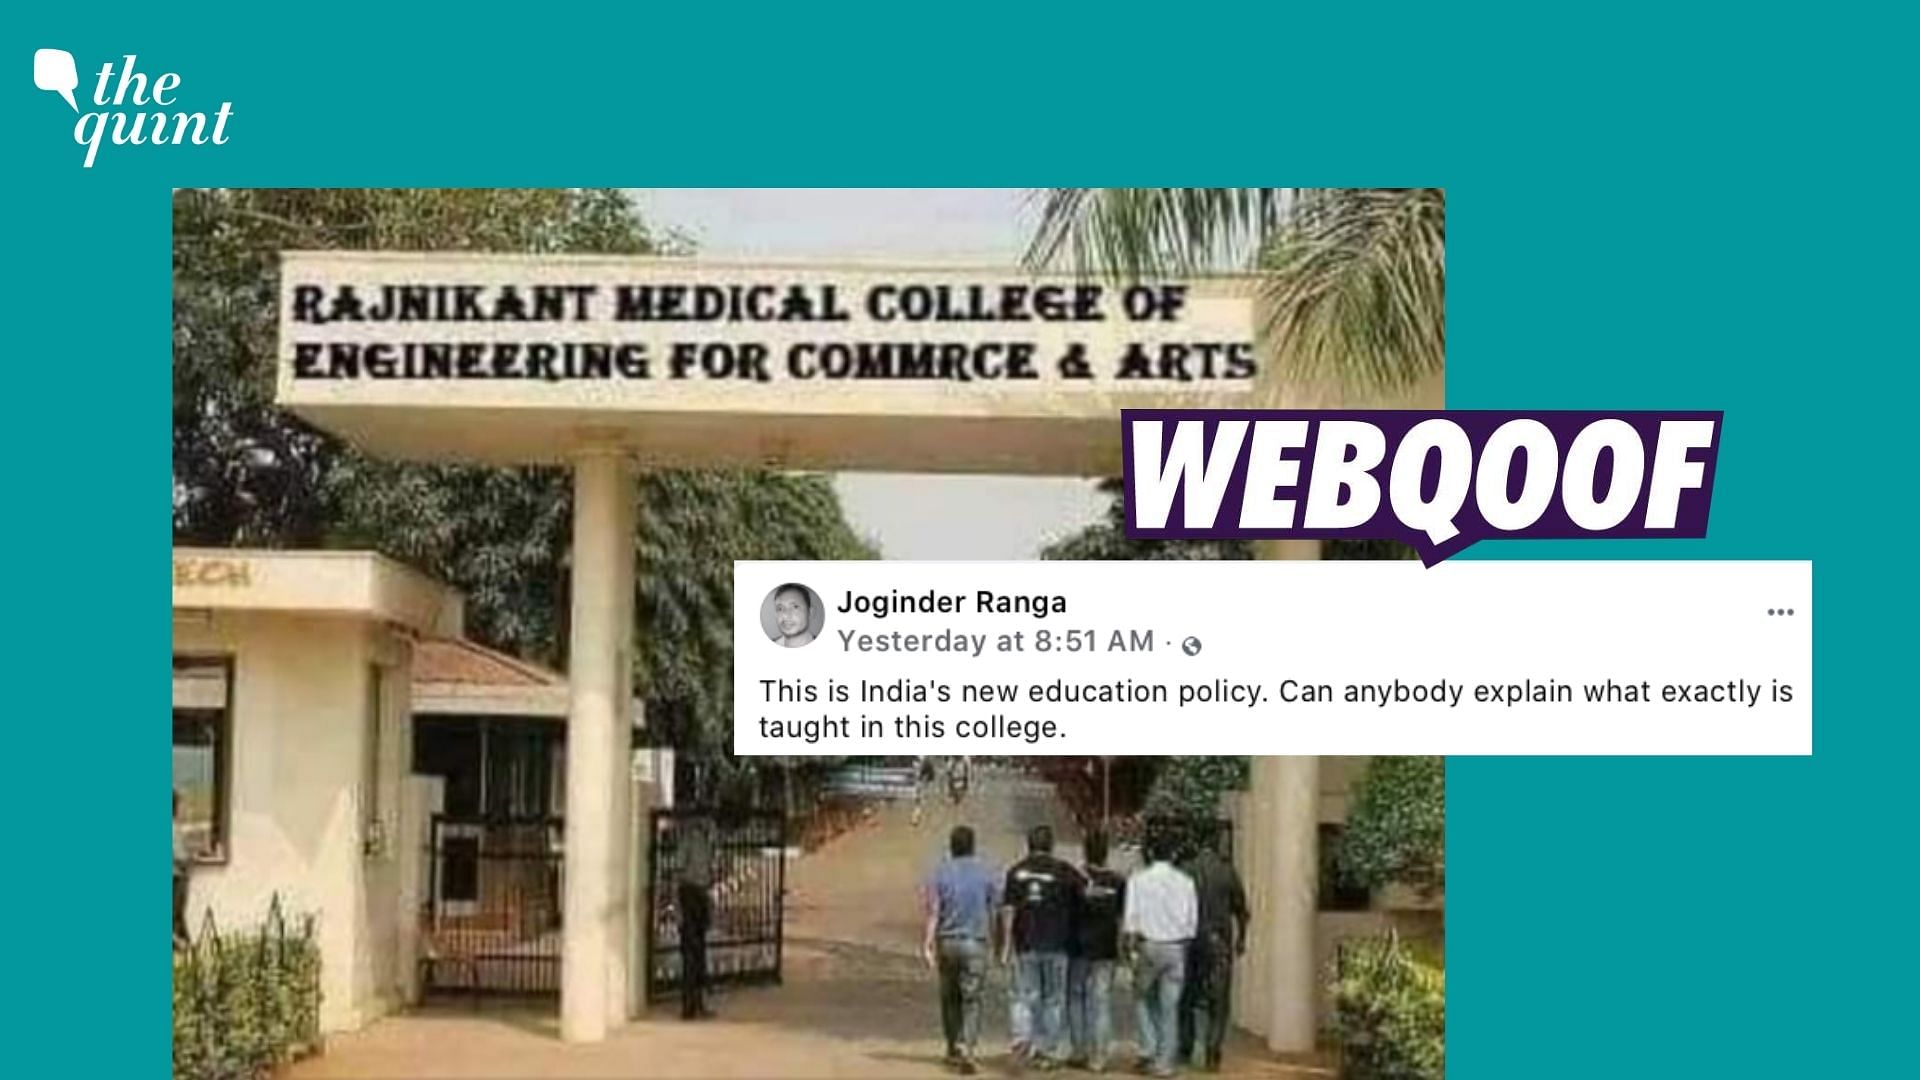 <div class="paragraphs"><p>An image of Xavier Institute of Management in Bhubaneswar was morphed to claim that it showed 'Rajnikant Medical College of Engineering For Commerce &amp; Arts'.</p></div>